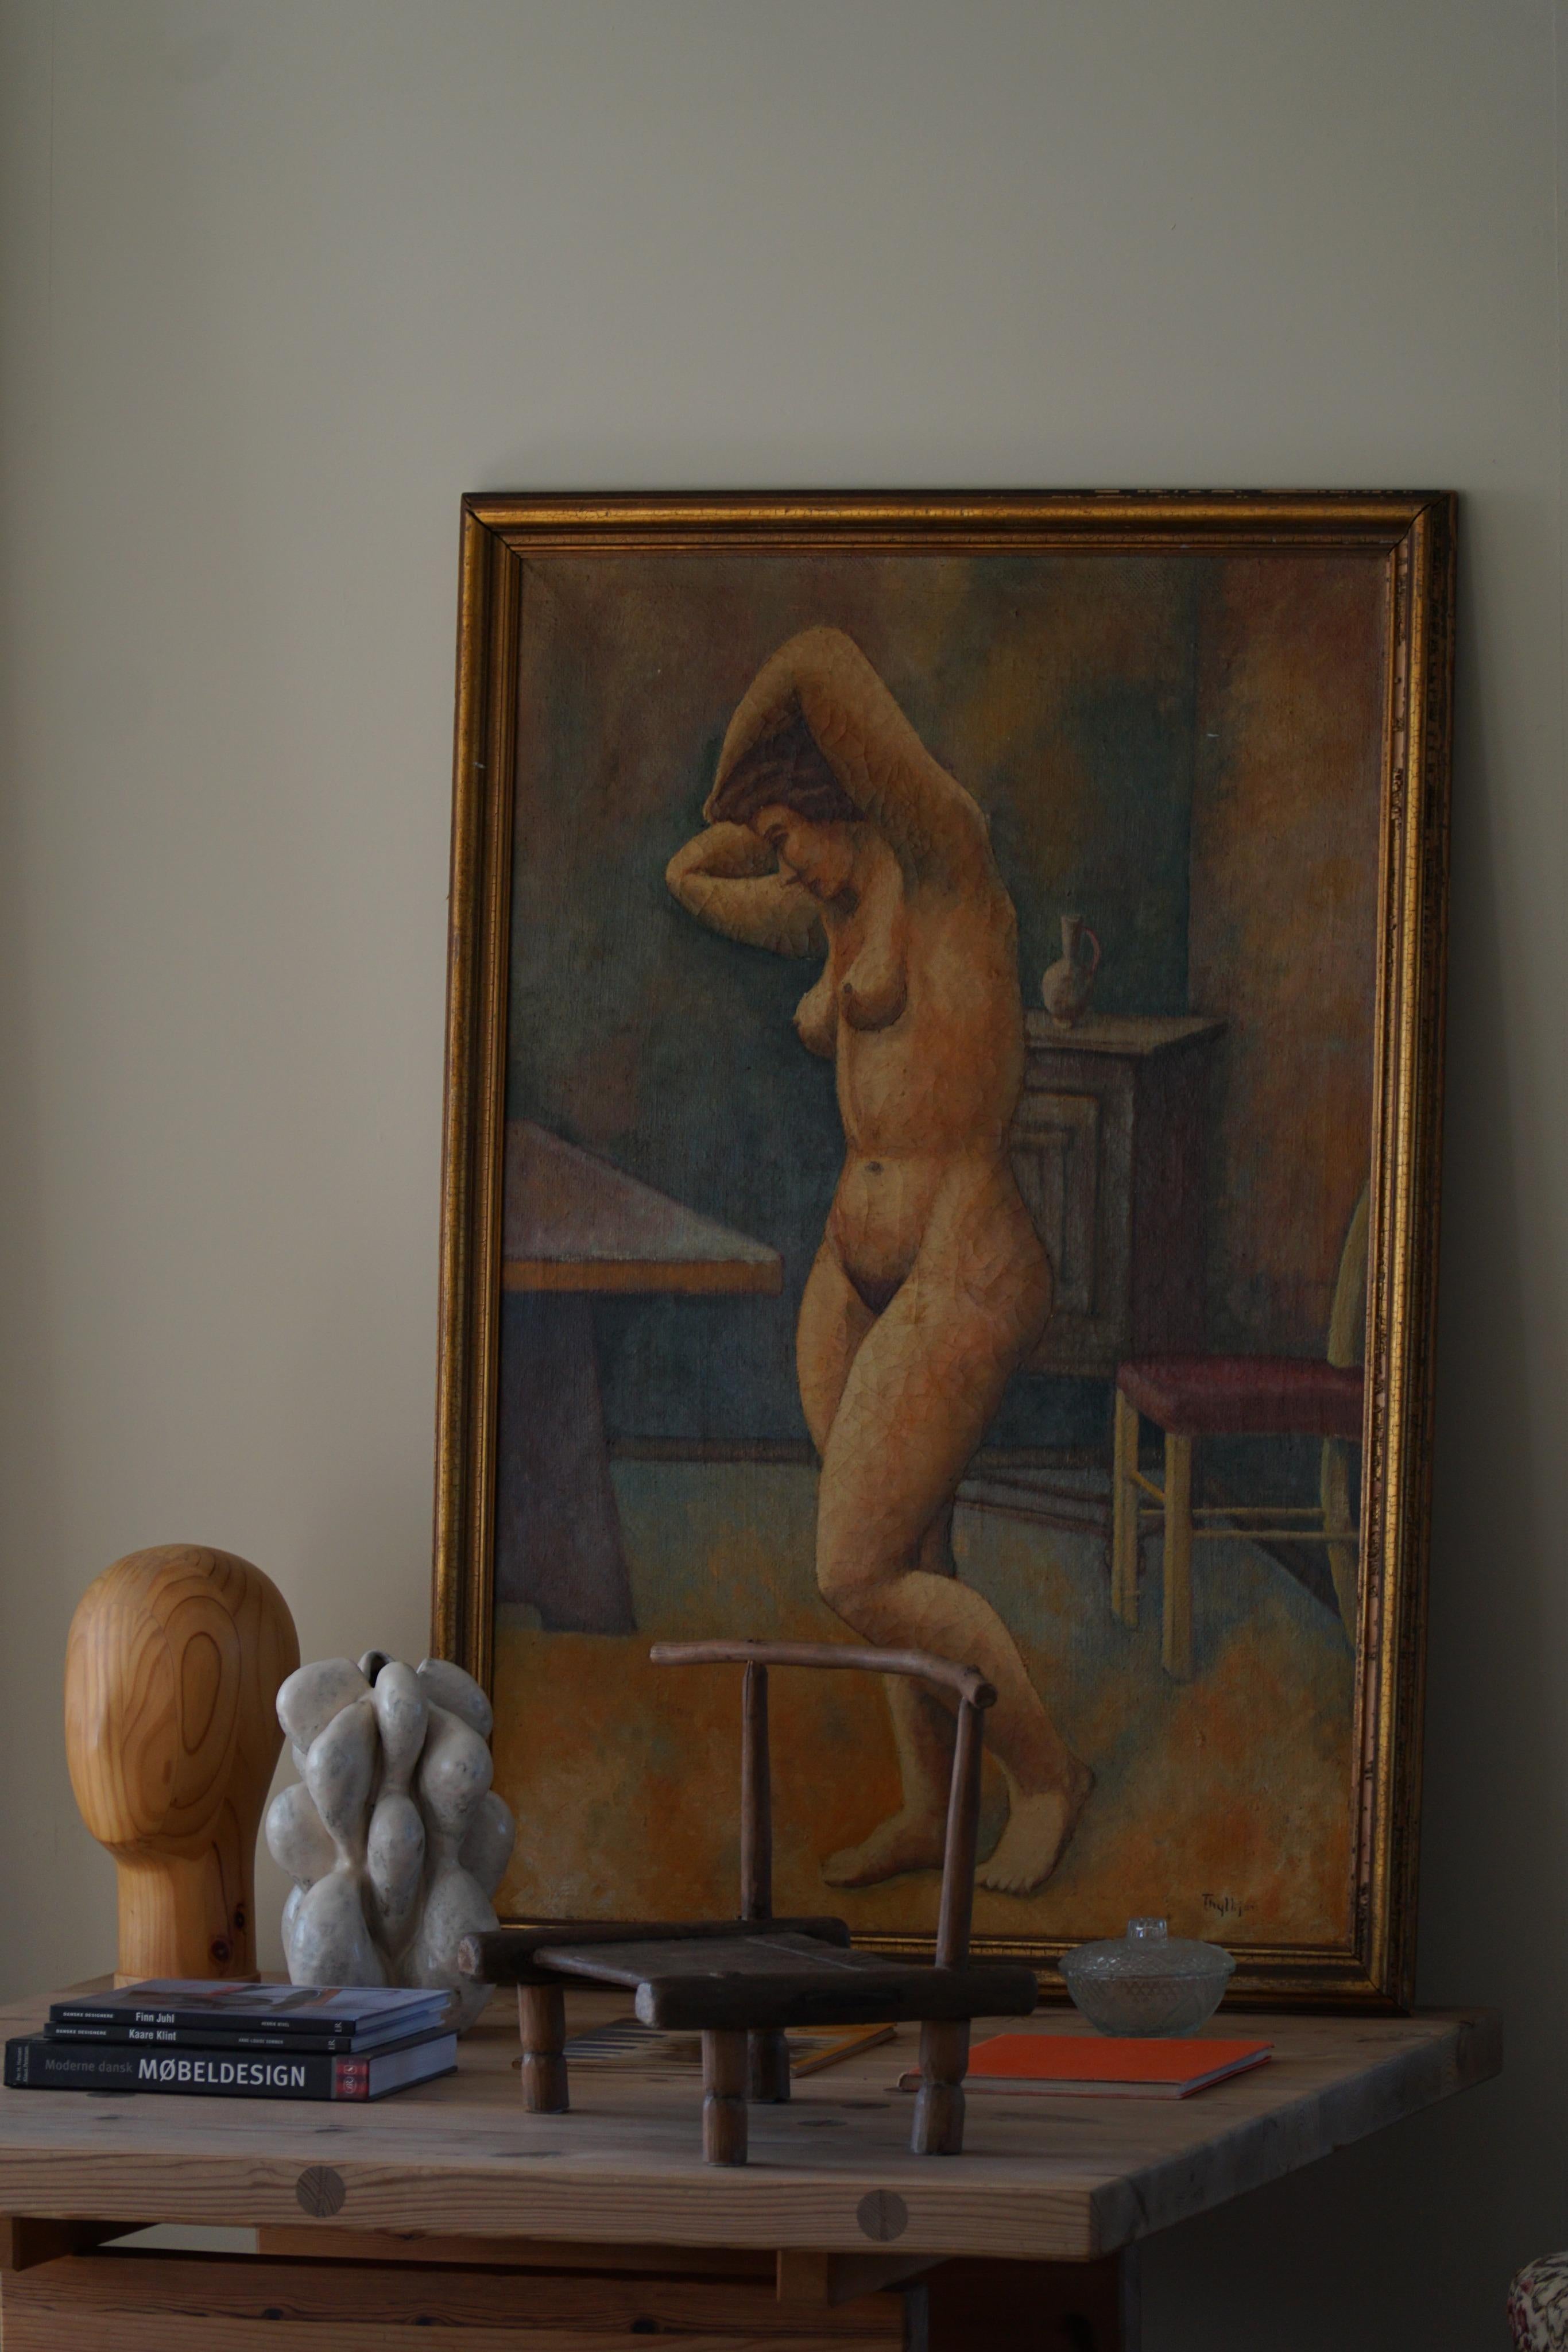 This oil on canvas painting by an unknown Danish artist, made in the late 19th century, is a striking and evocative work of art. The painting depicts a naked woman posing.
The use of light and shadow creates a sense of depth and dimensionality, with